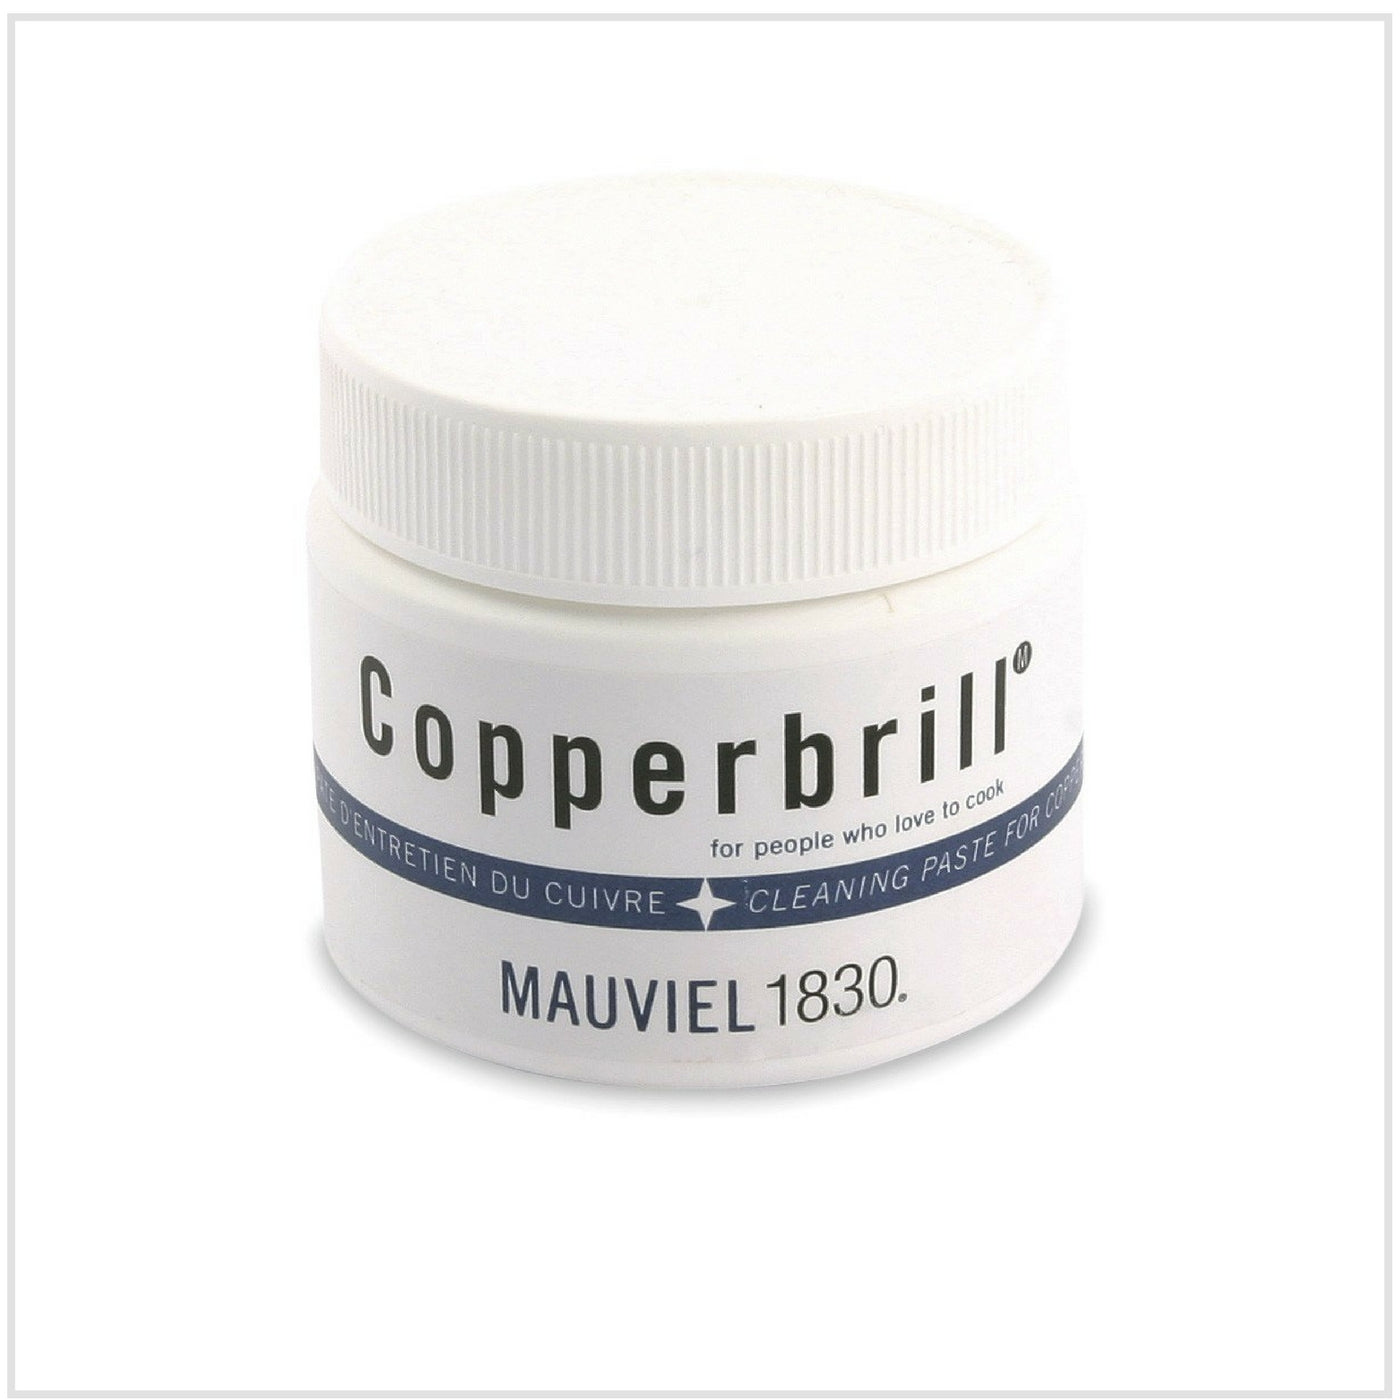 Mauviel CopperBrill Cleaner